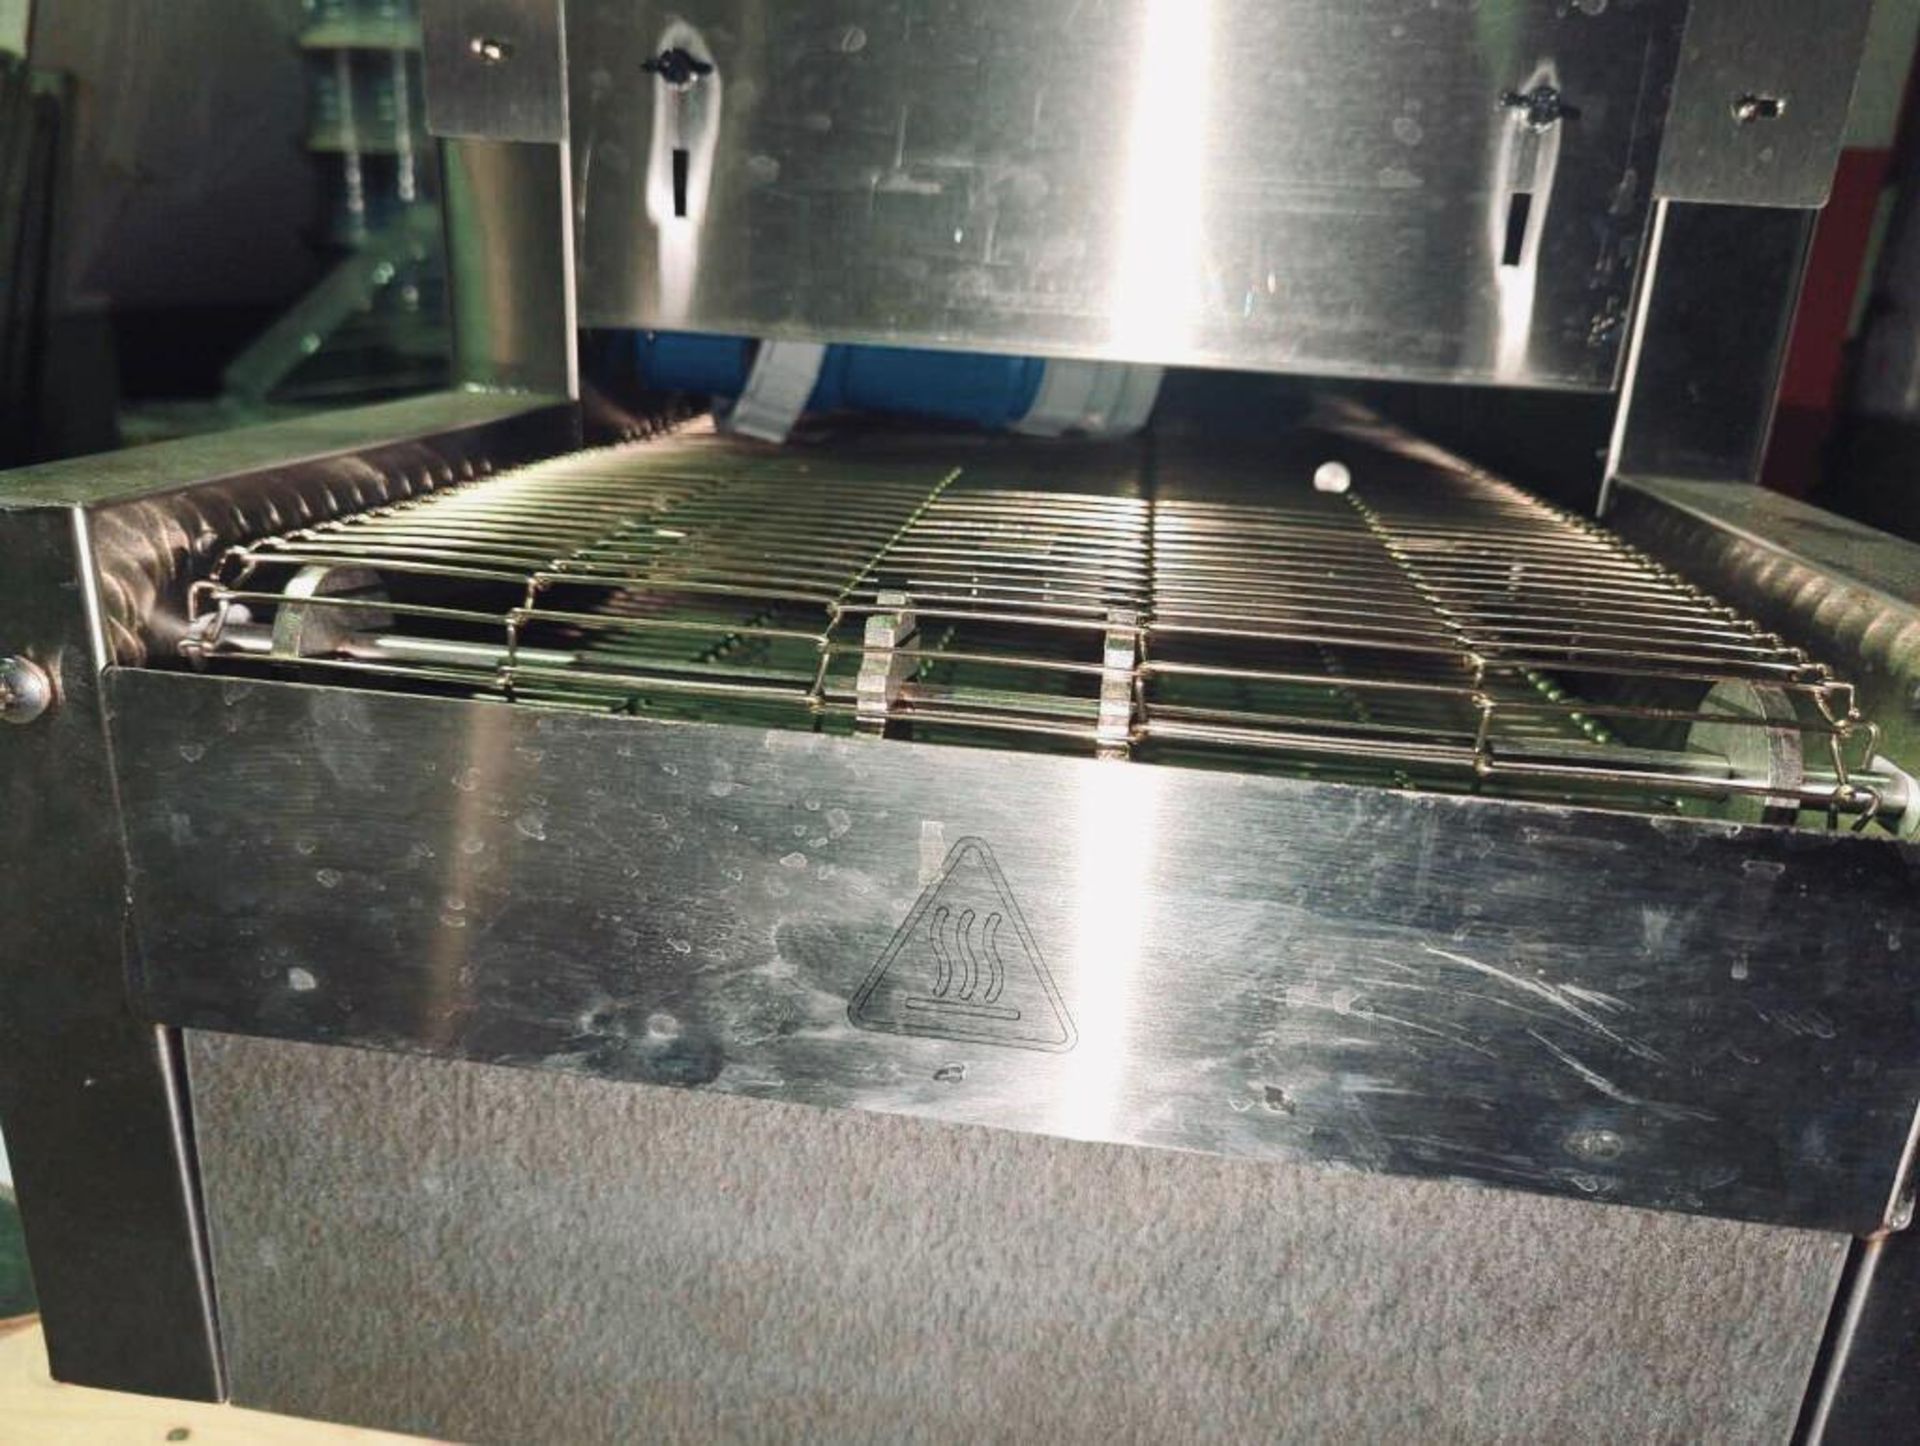 Vollrath JSO14 Stainless Steel Left To Right Variable Speed Tunnel Oven - Image 4 of 10